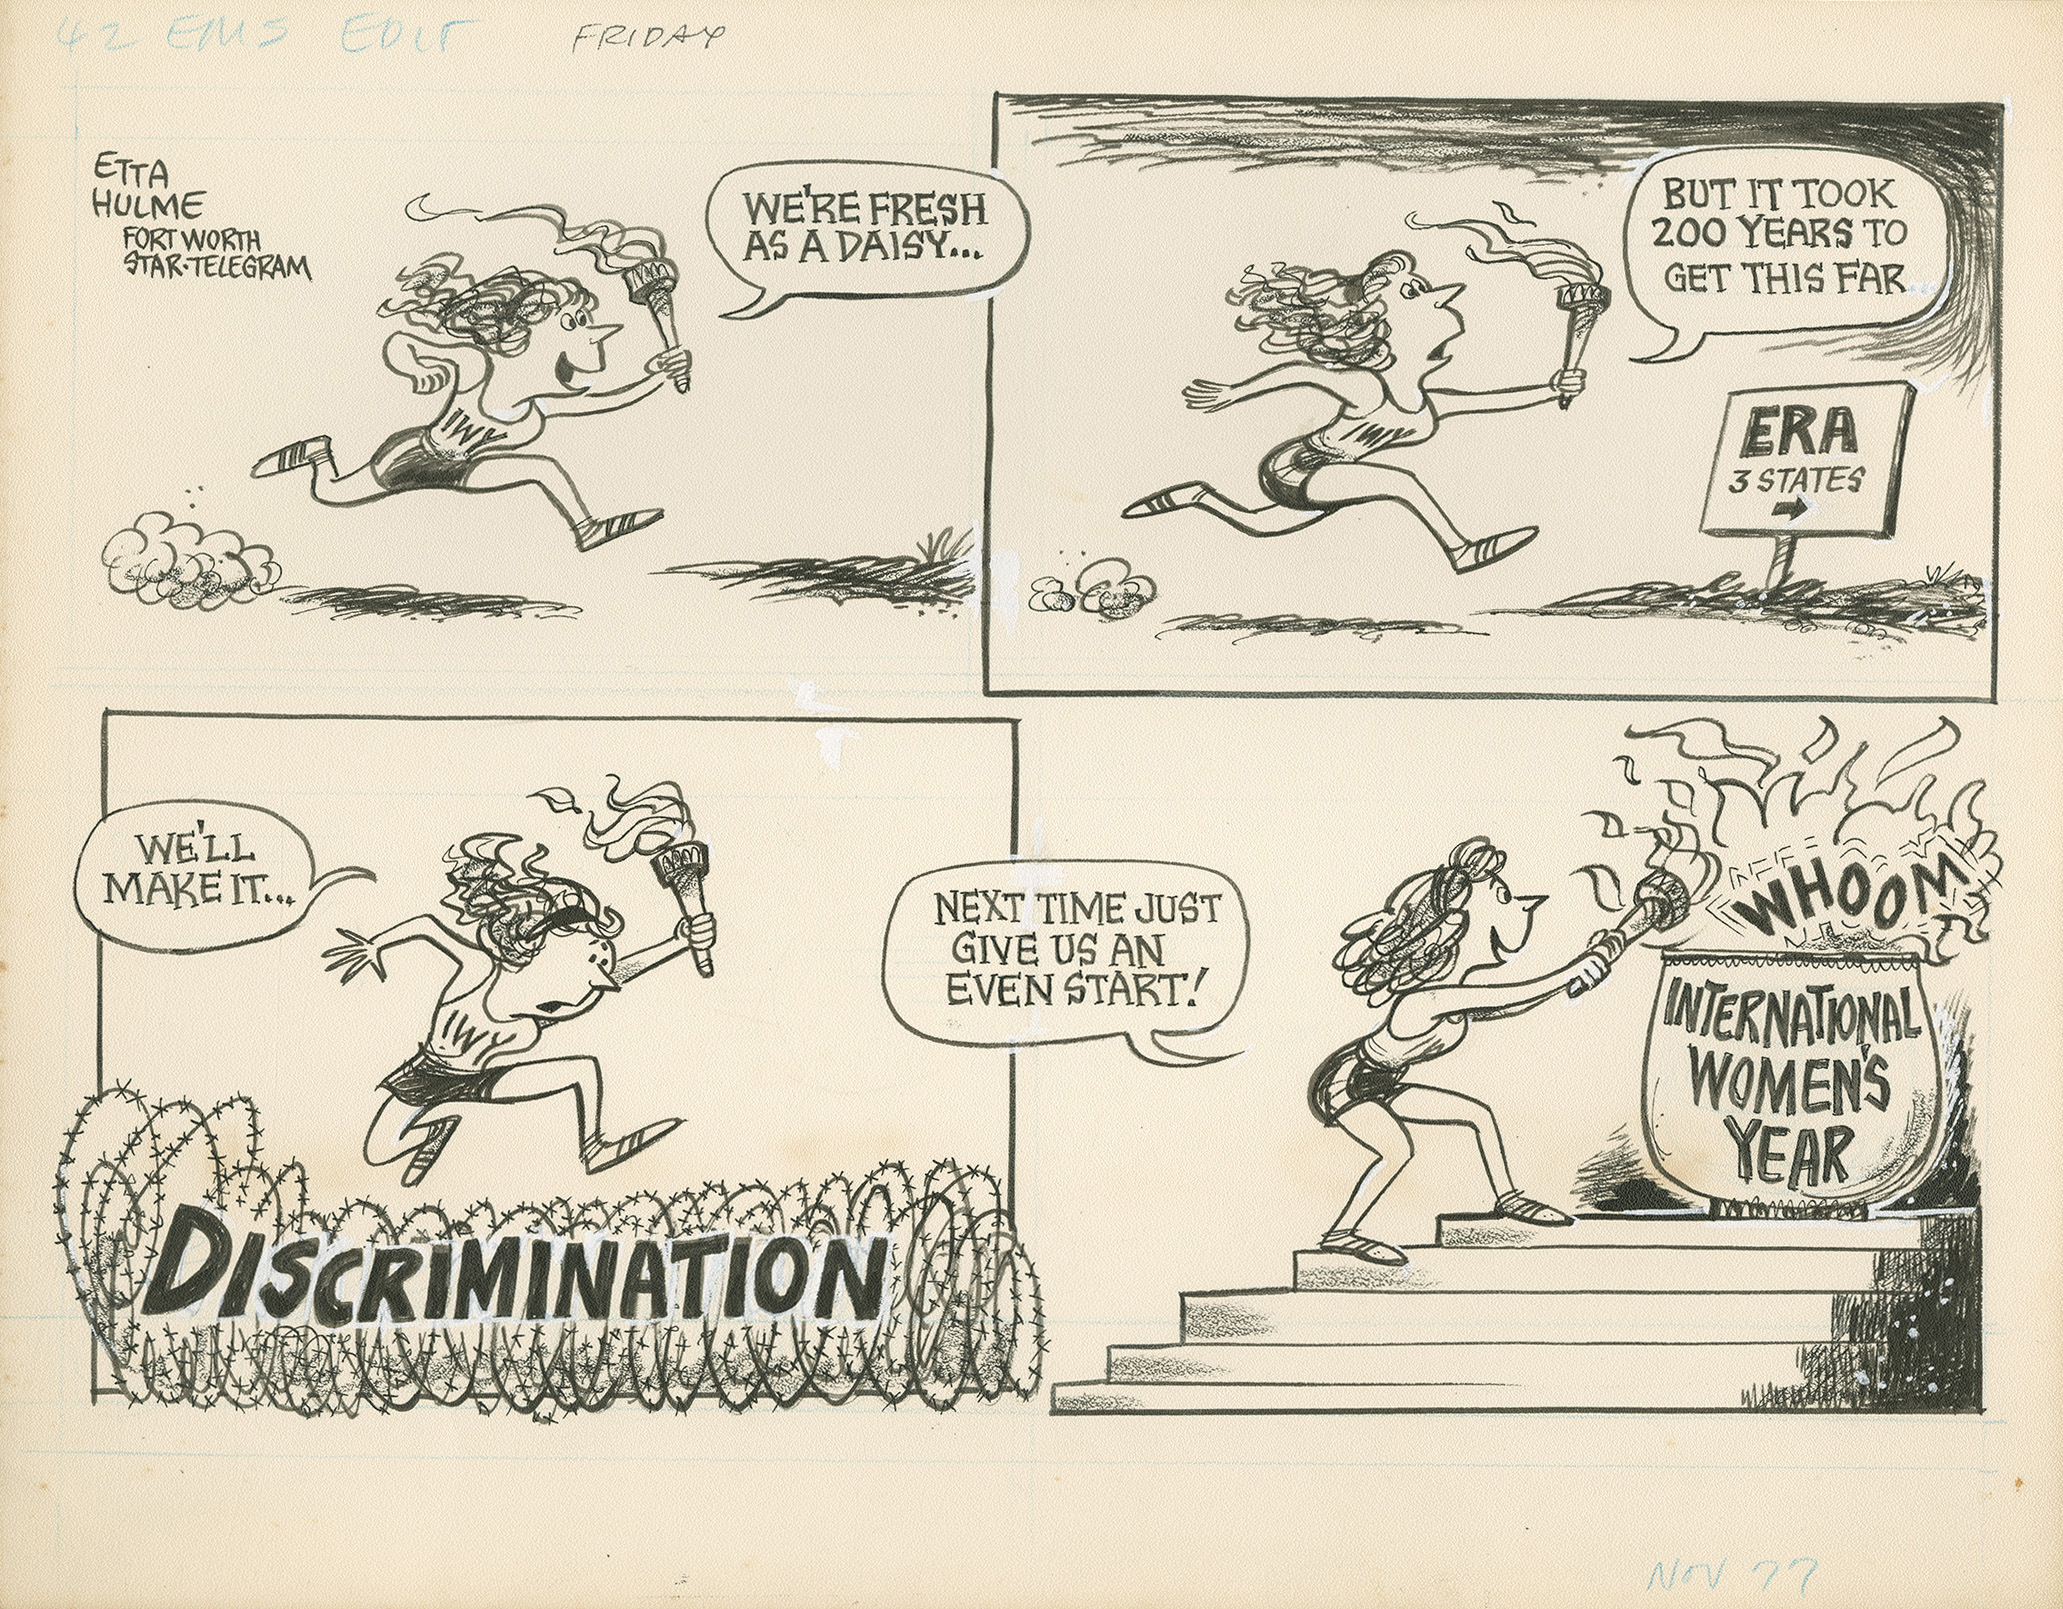 Editorial cartoon by Etta Hulme (1977) depicting a woman carrying an Olympic torch to light a bowl that reads “International Women’s Year” while leaping over a barbed wire fence labeled “Discrimination”